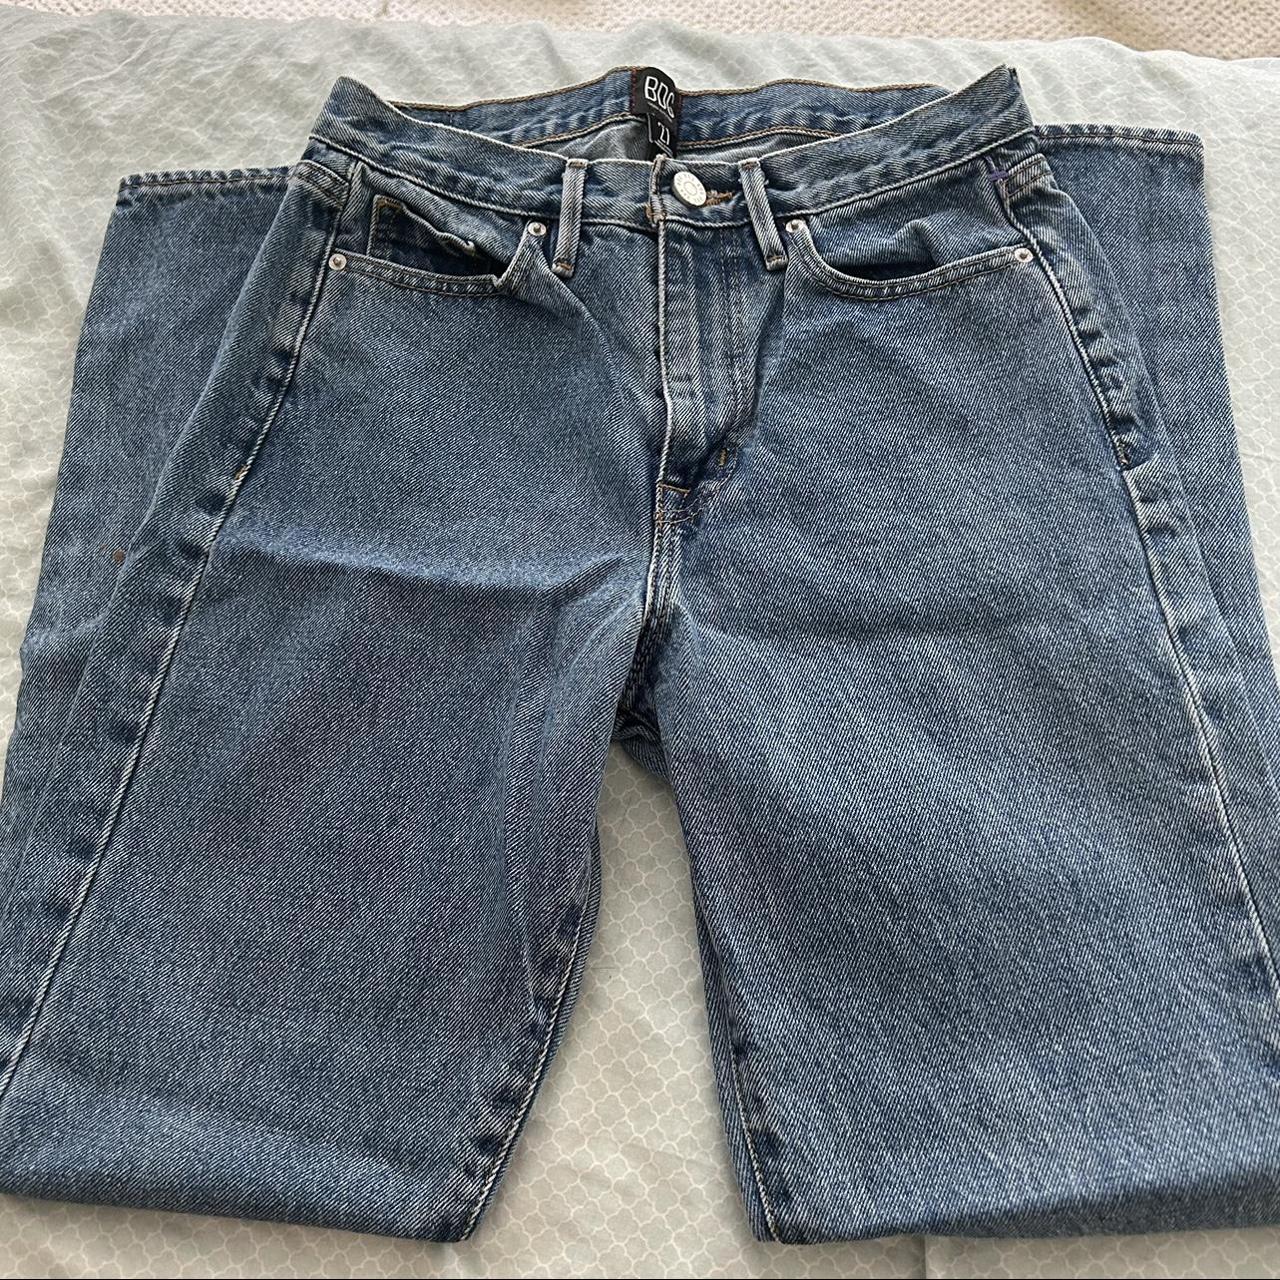 Urban Outfitters Jeans - Depop